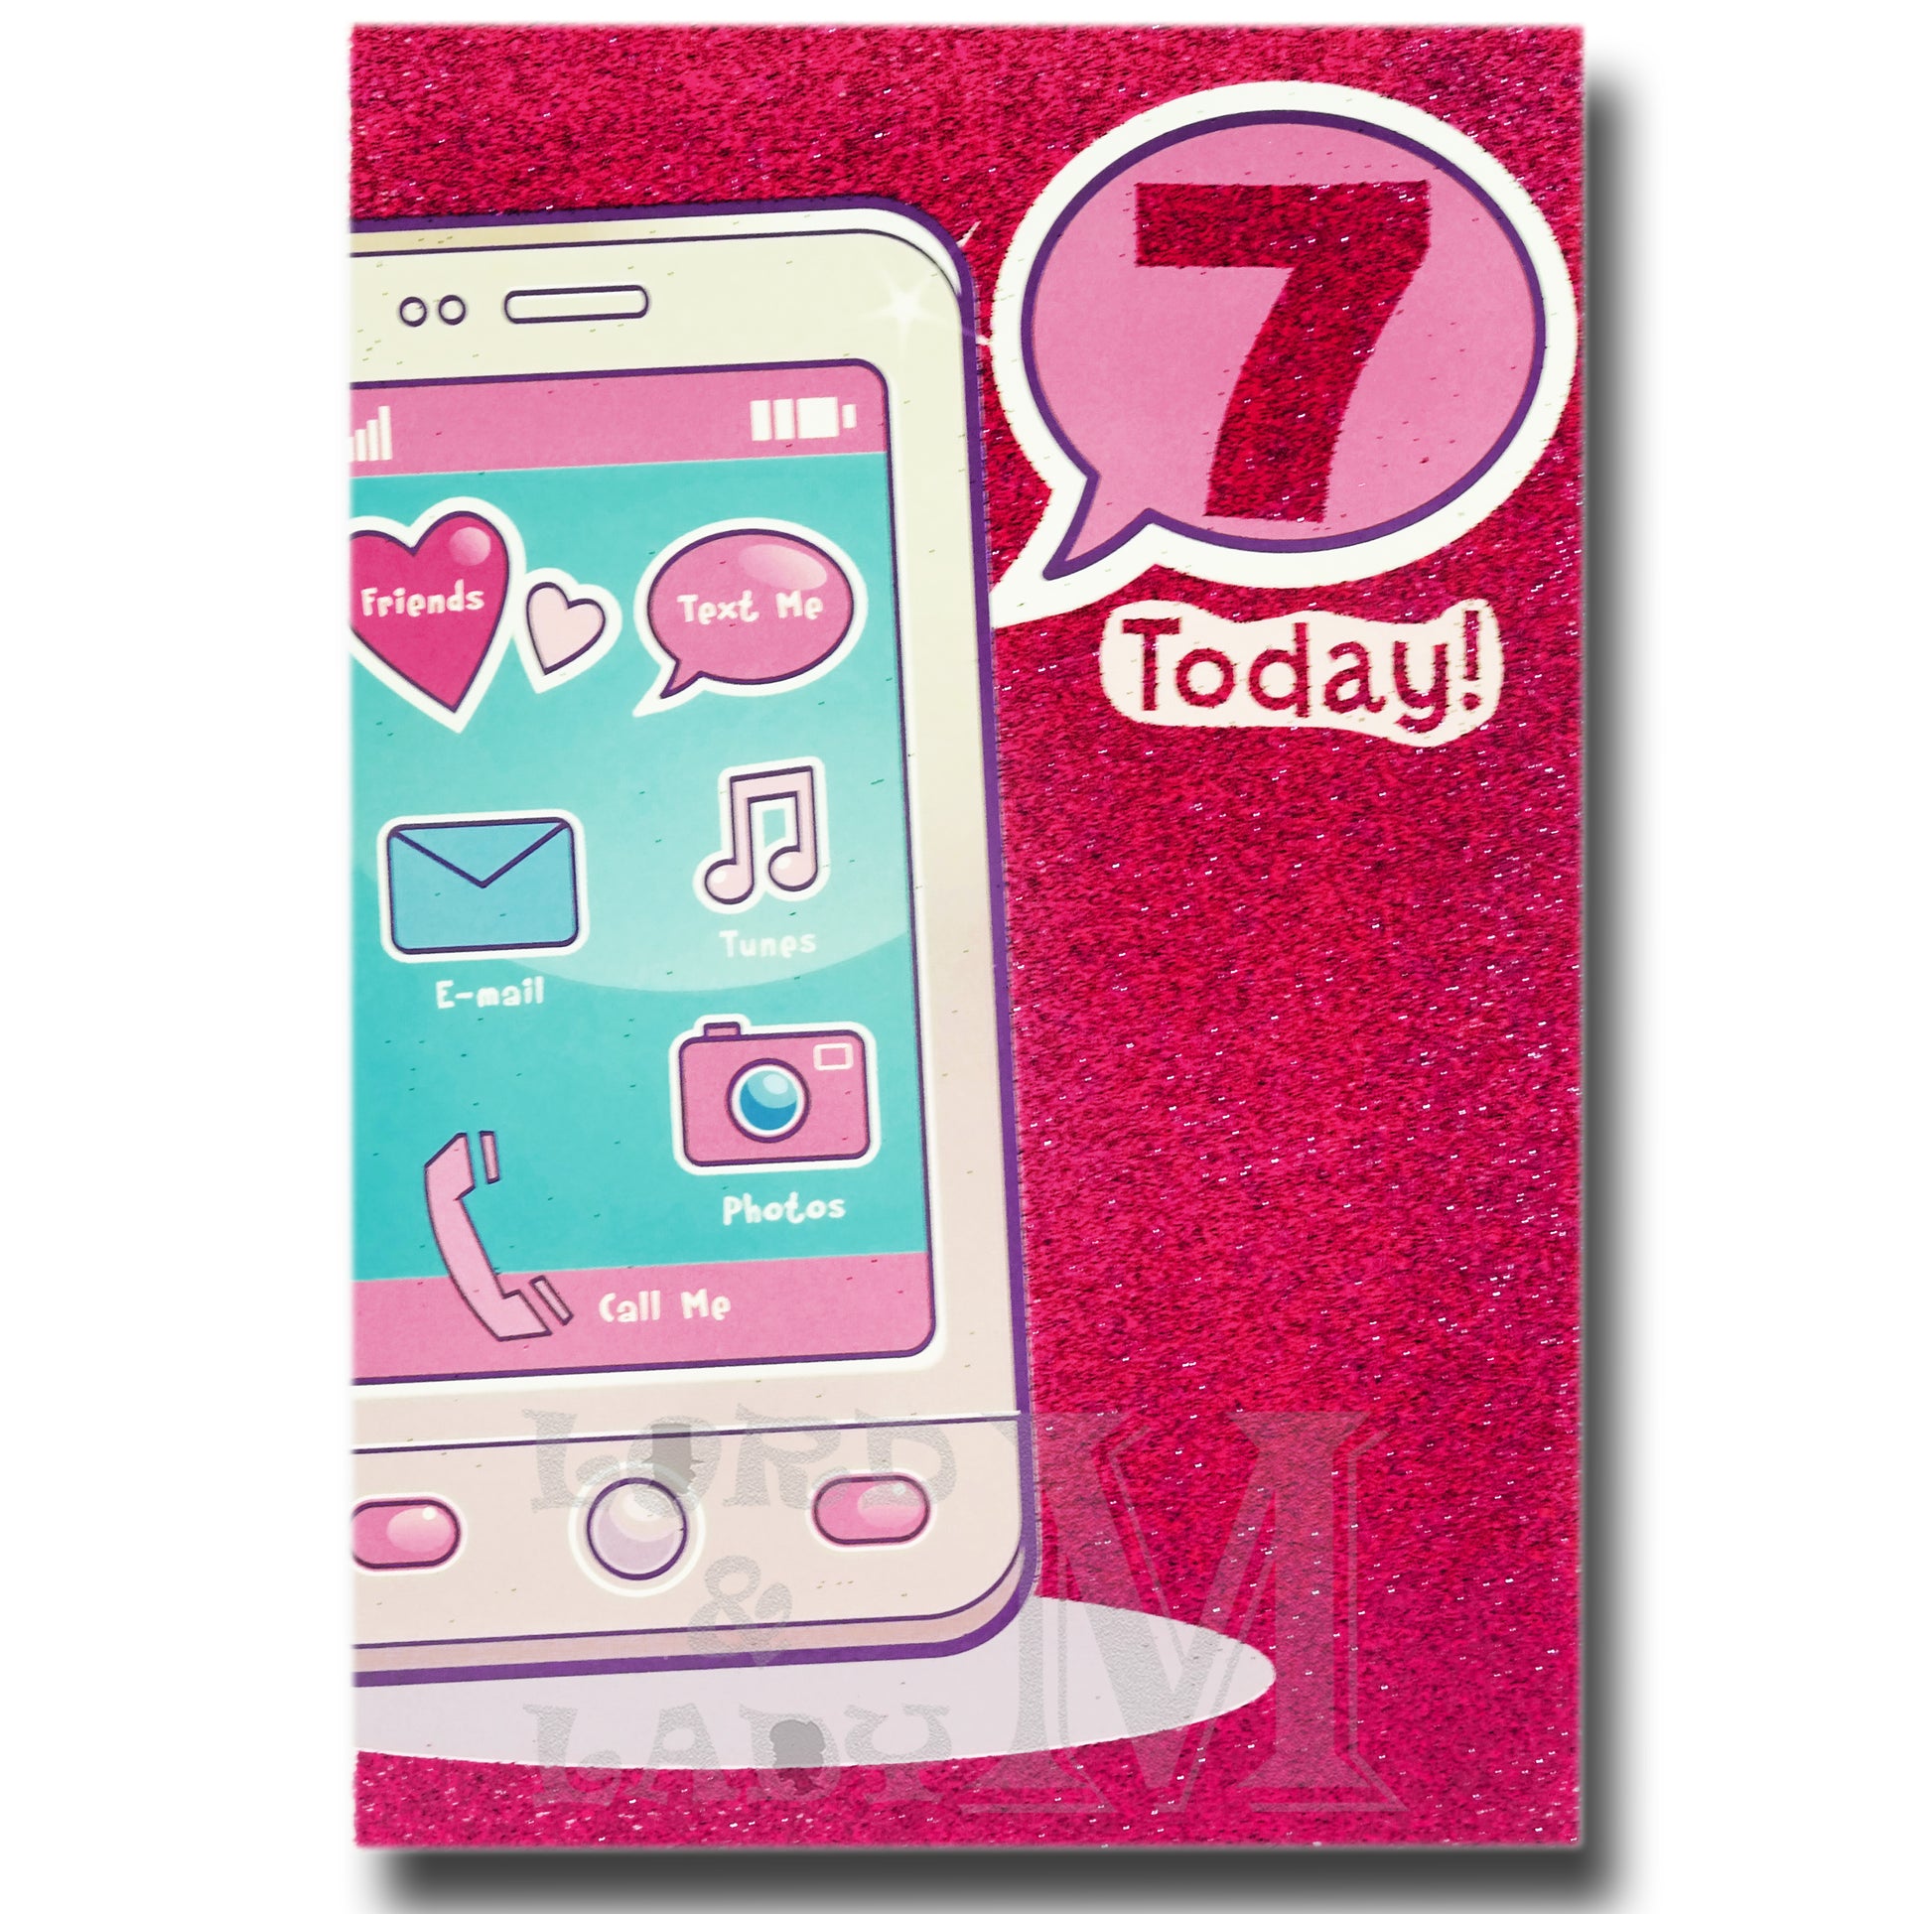 20cm - 7 Today! - Mobile Phone Pink - E